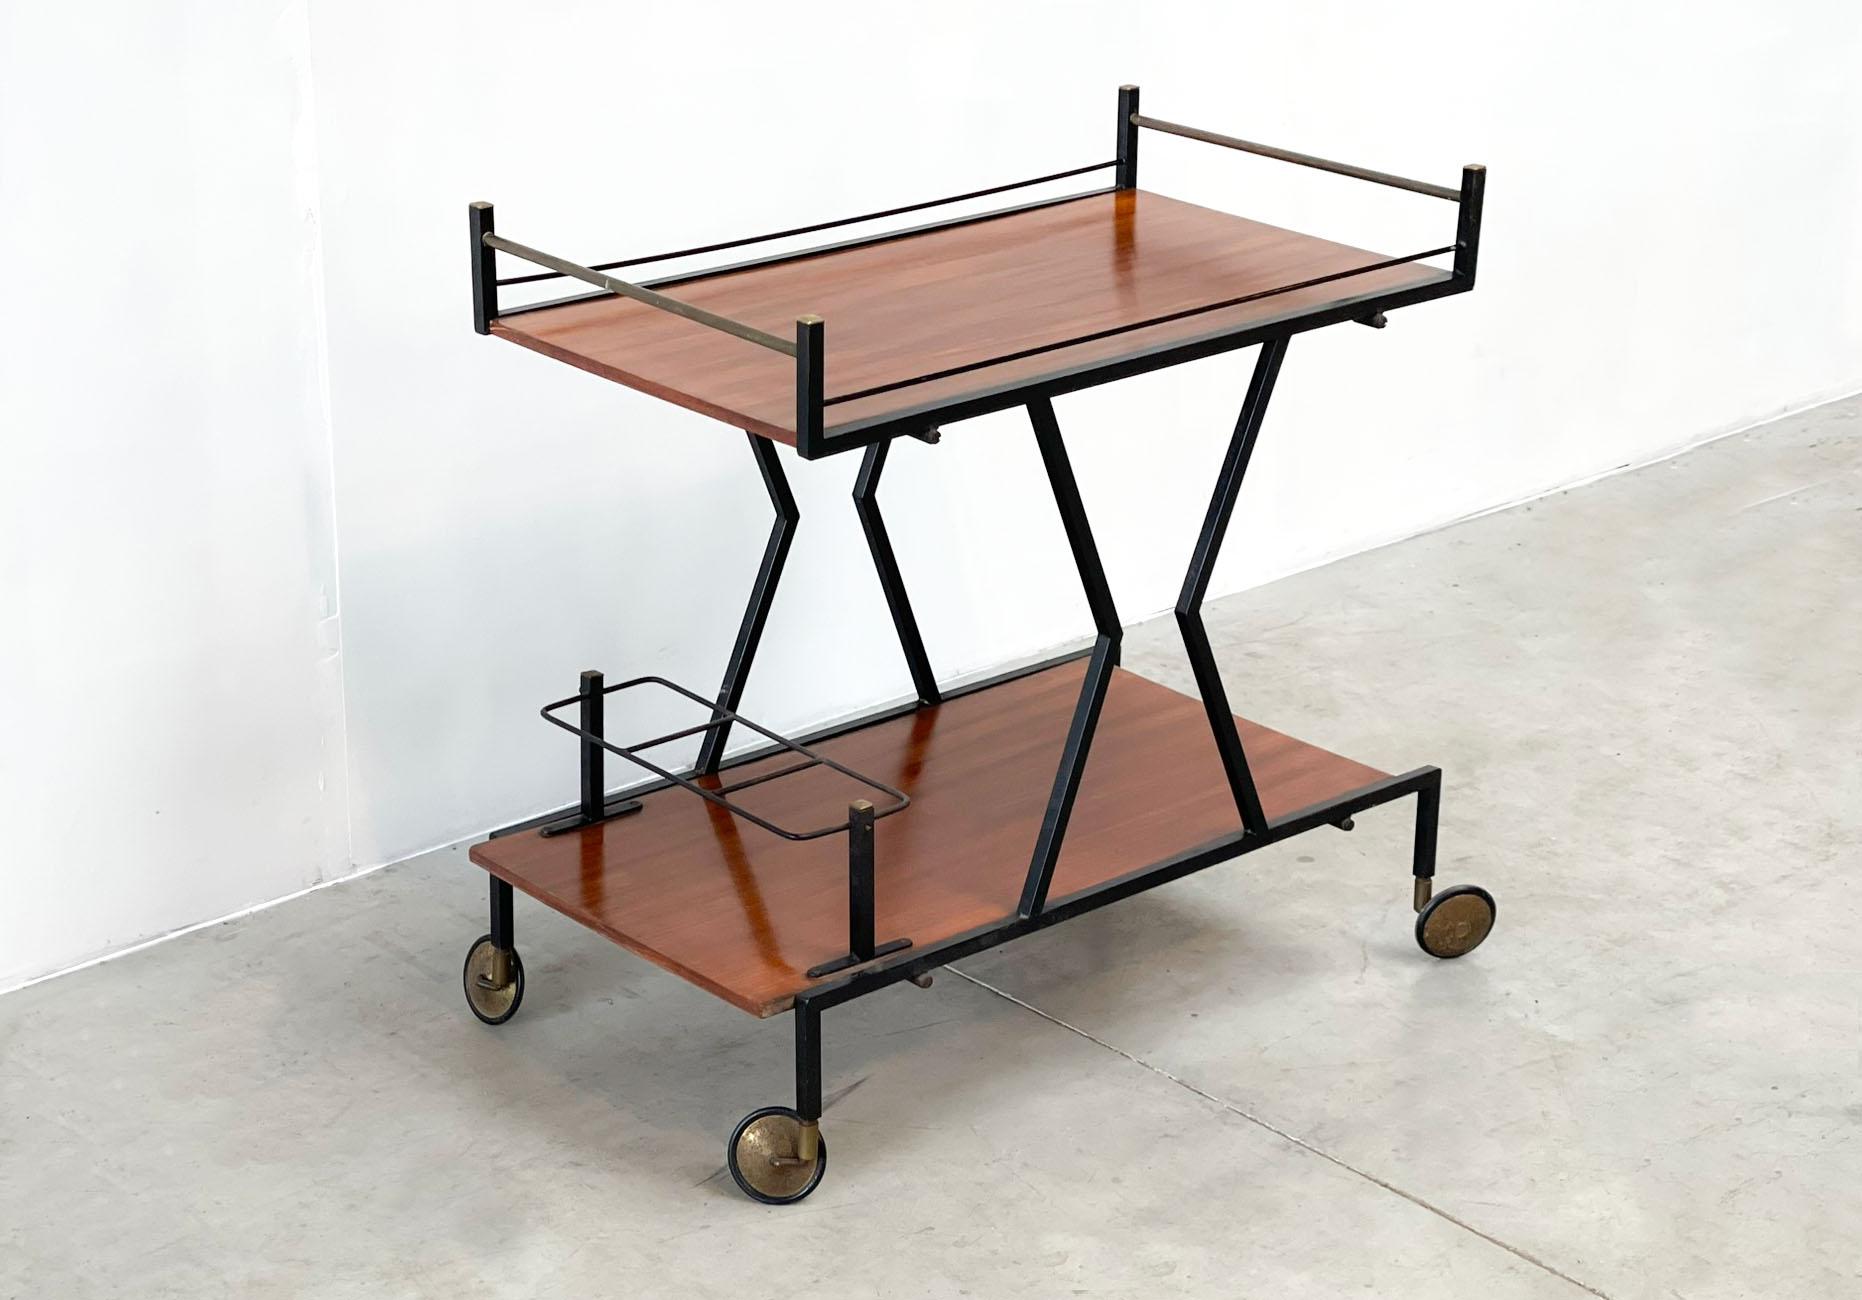 Italian barcart
Very elegant and playful bar cart from Italy. This bar cart was made in the 60s In Italy by an unknown manufacterer. Nevertheless, this example remains a good example of elegant and good Italian design. 

 

It features a solid